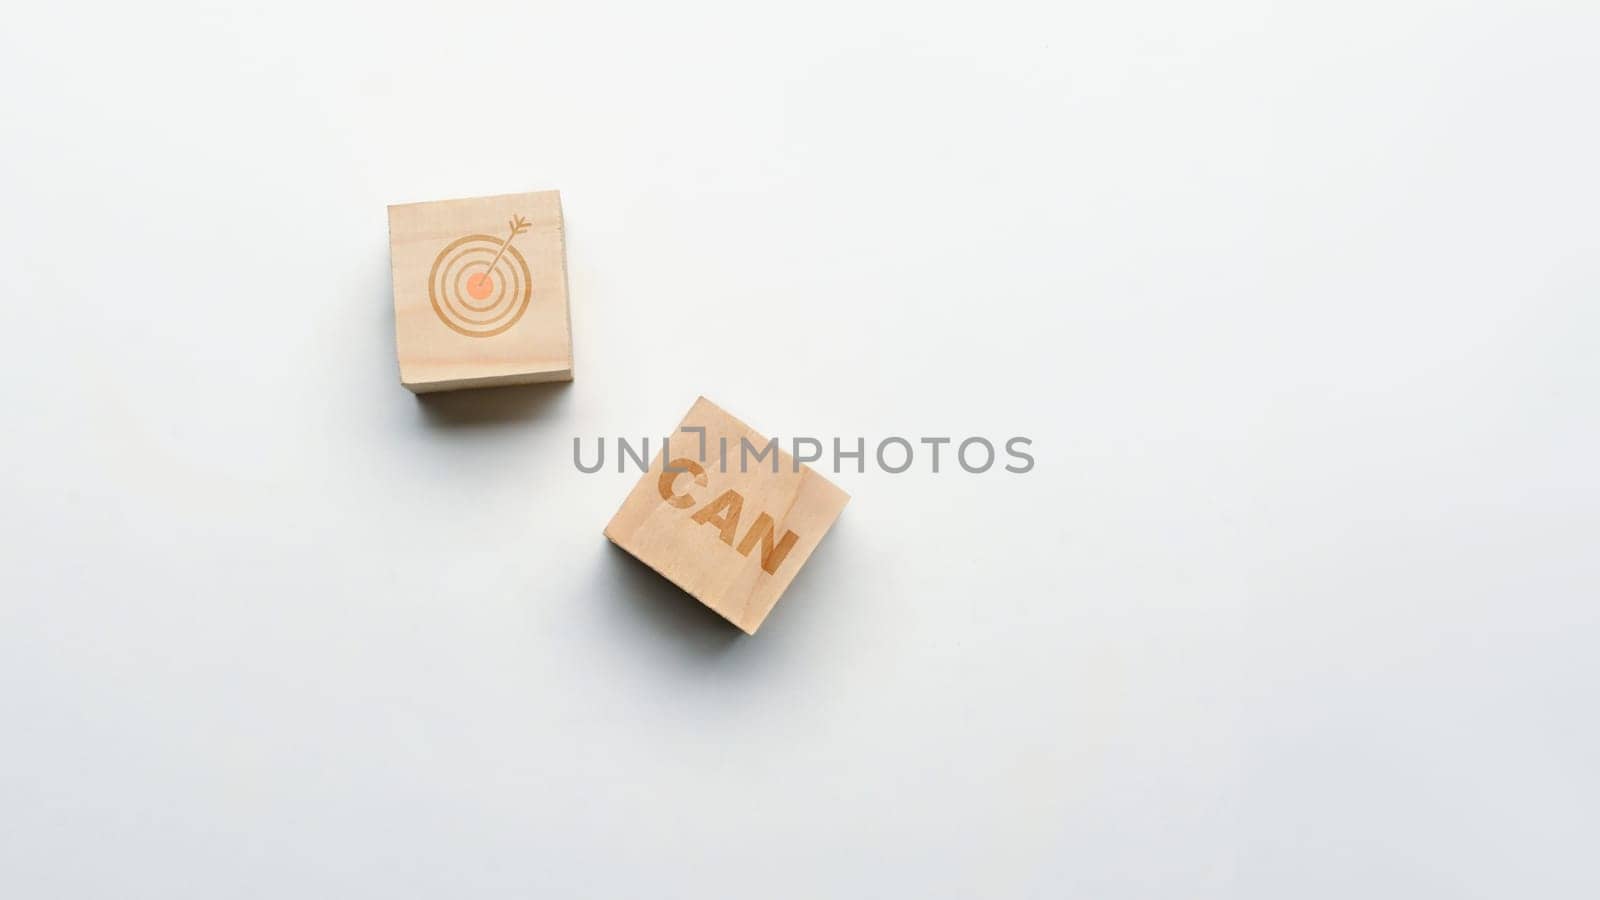 CAN word on wooden cube with target icon on white background. Motivational and inspirational concept.